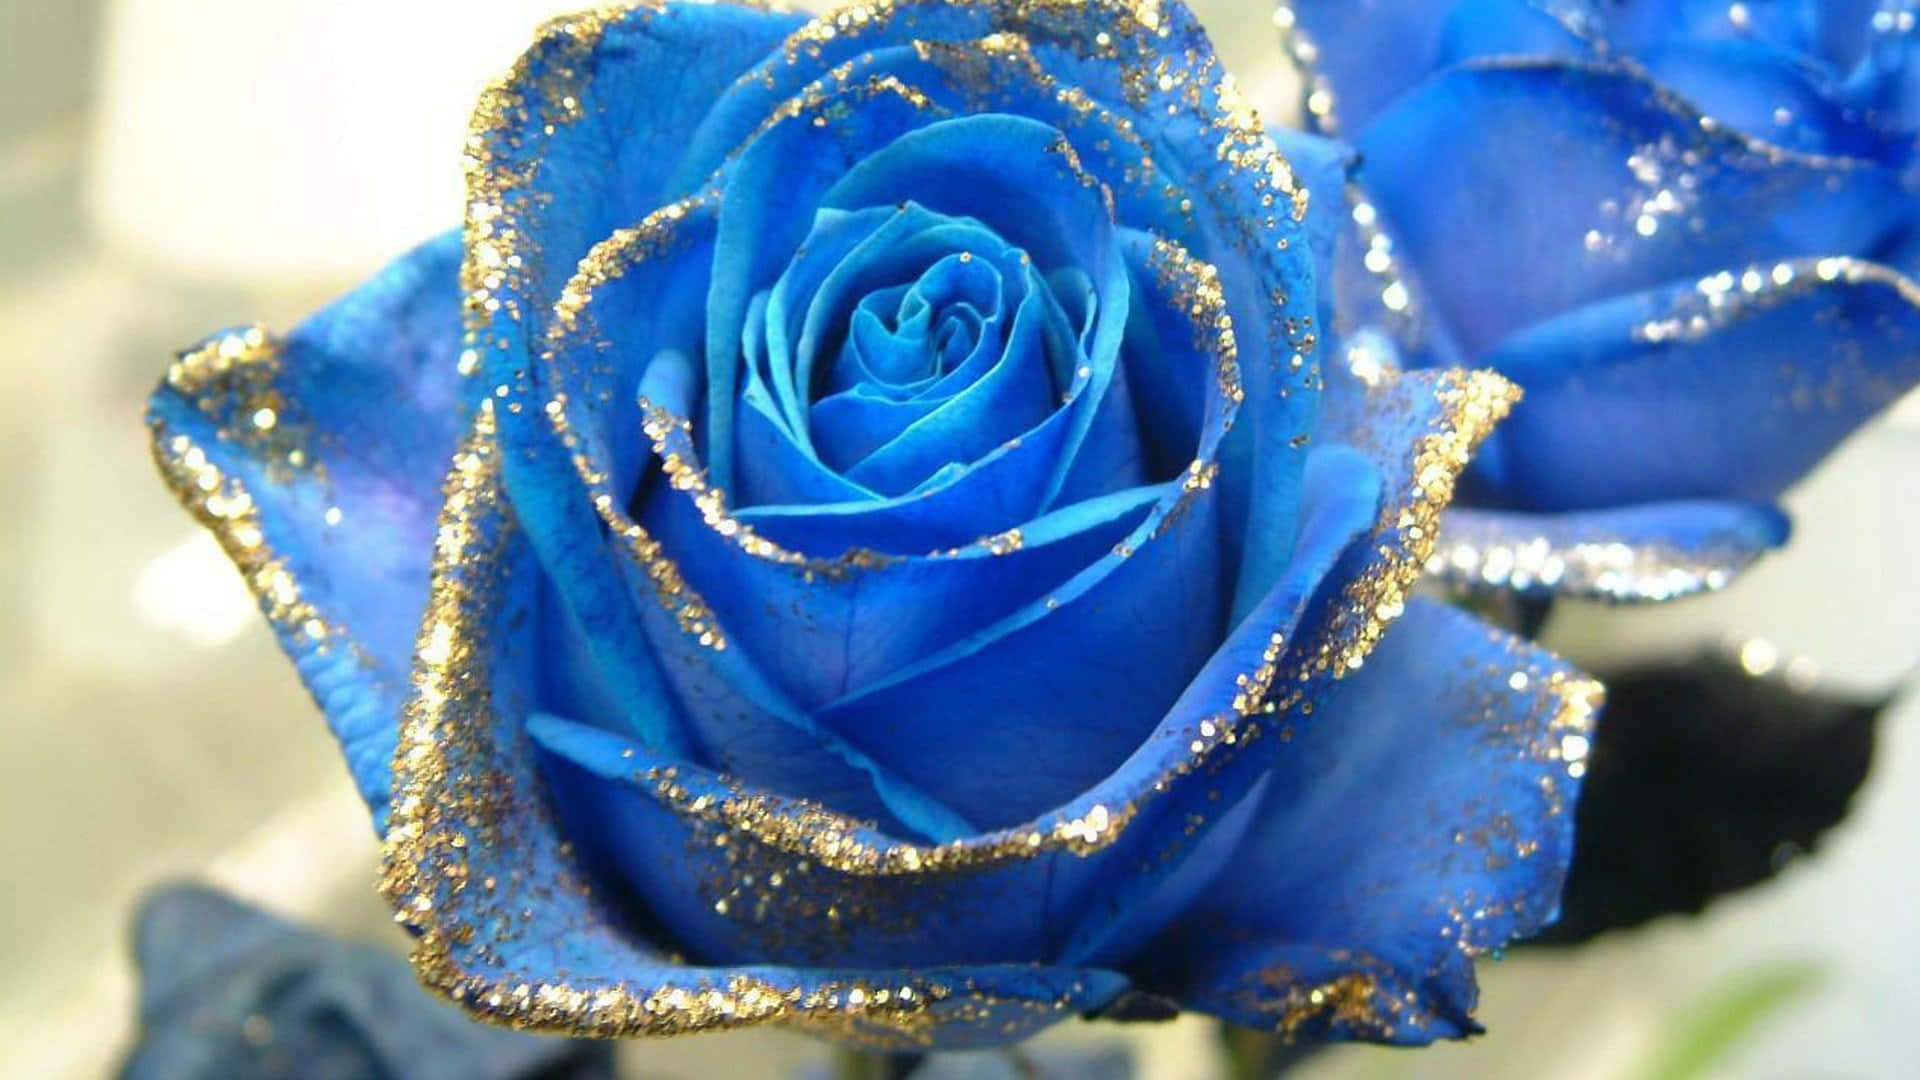 A Gorgeous Bouquet Of Delicate Blue Roses. Background